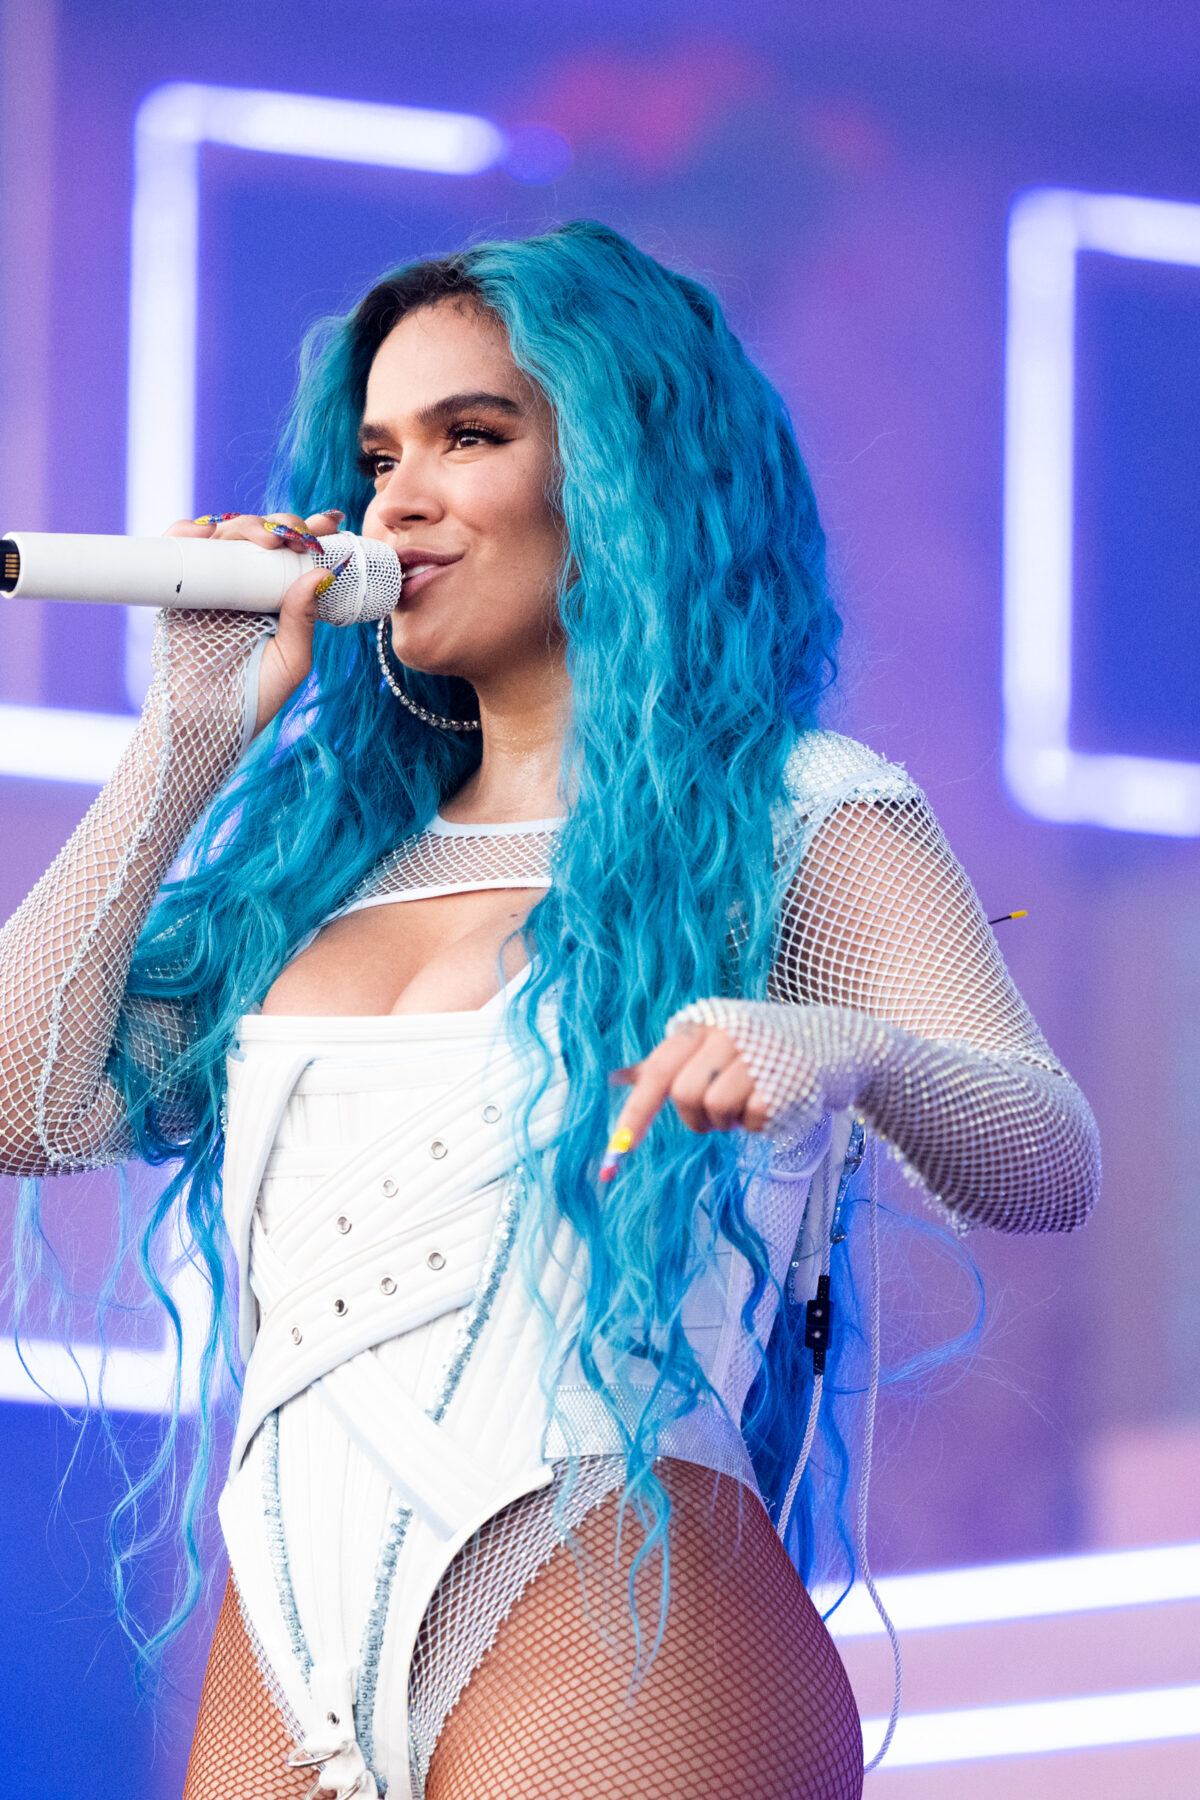 INDIO, CALIFORNIA - APRIL 24: Singer Karol G performs on the Main Stage during Weekend 2, Day 2 of the 2022 Coachella Valley Music & Arts Festival on April 24, 2022 in Indio, California. (Photo by Scott Dudelson/Getty Images for Coachella)